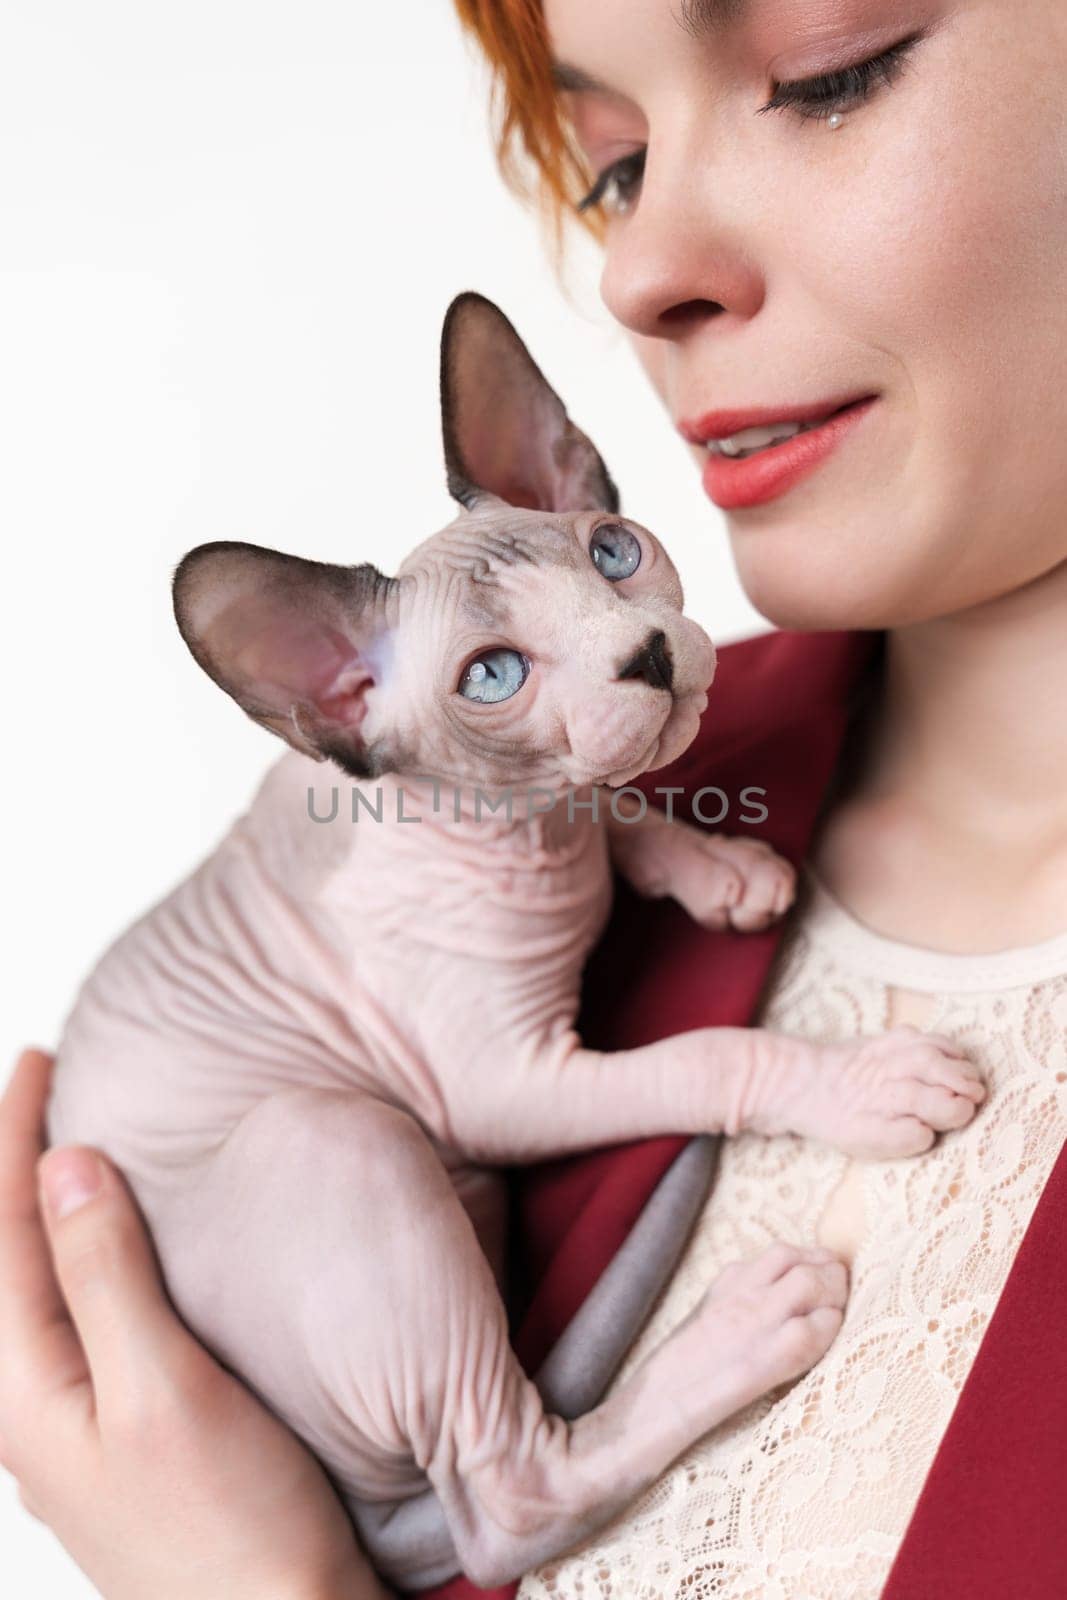 Hipster young redhead woman gently hugging Sphynx Cat. Selective focus on domestic kitten, shallow depth of field. Pretty woman dressed in red jacket. Part of series. Studio shot on white background.